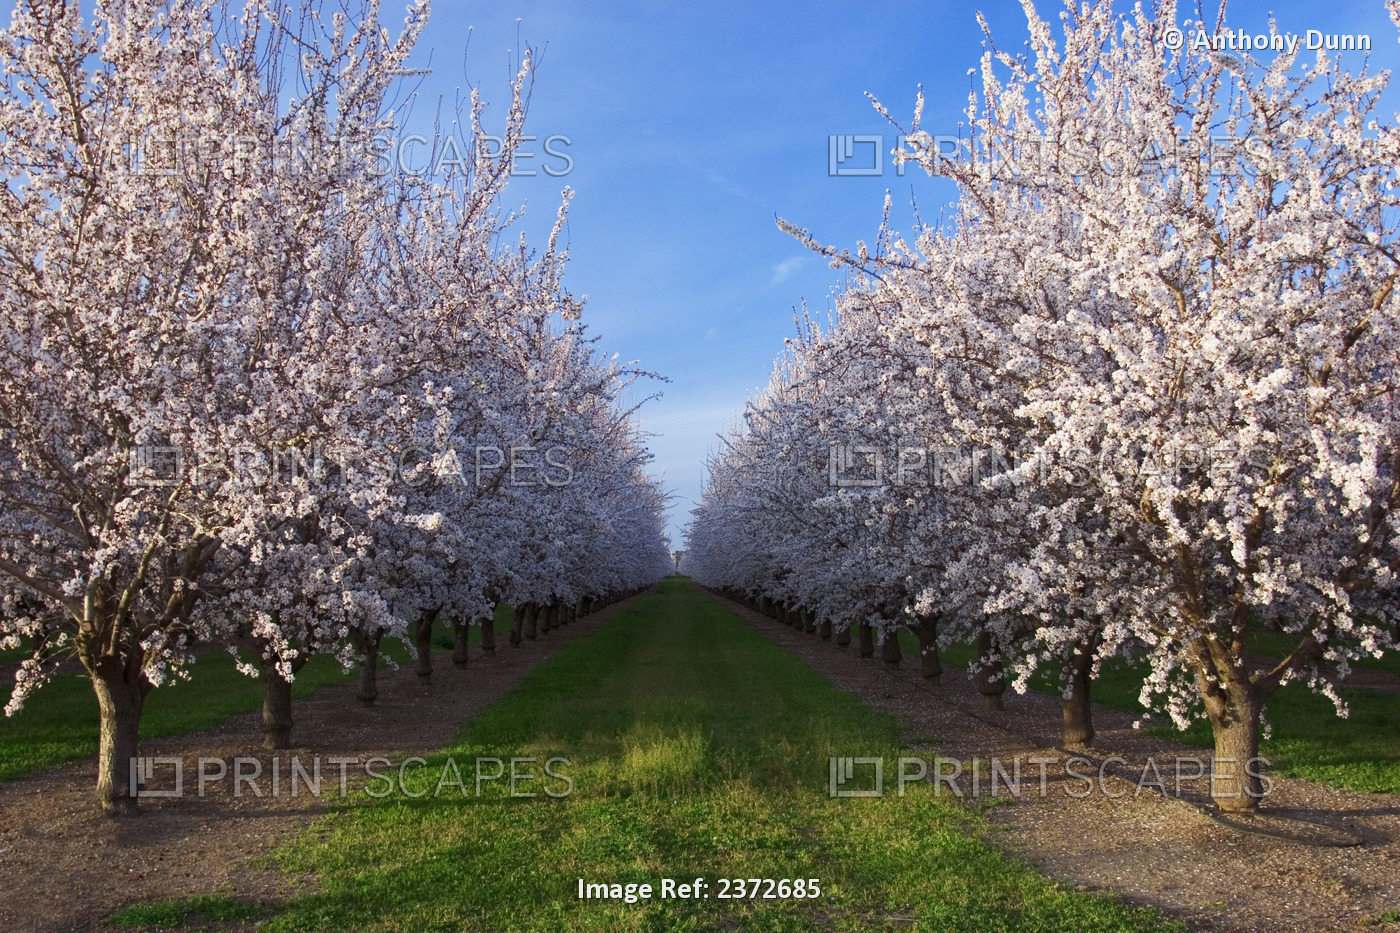 Agriculture - Looking down between rows of almond trees in full Spring bloom / ...